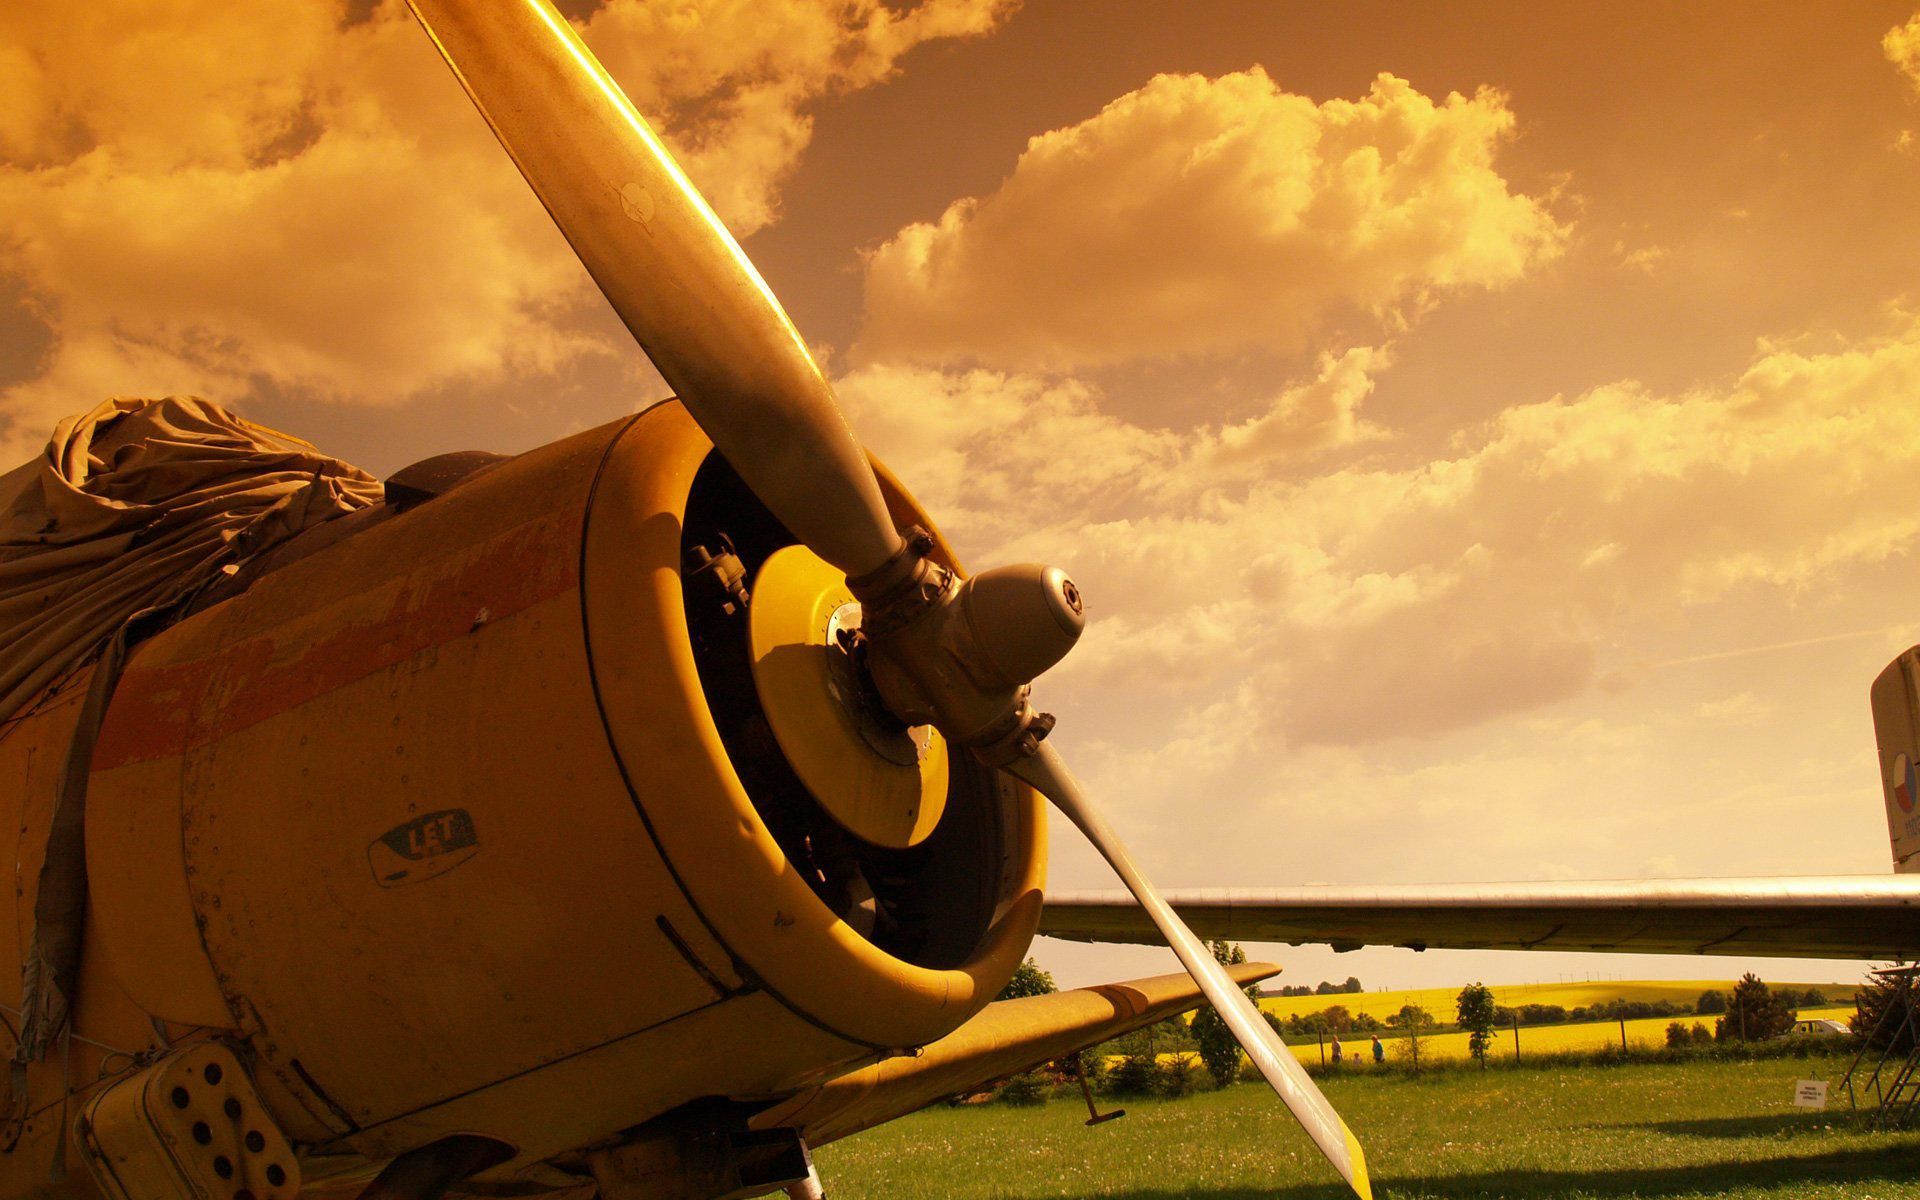 The propeller of the aircraft, HD definition